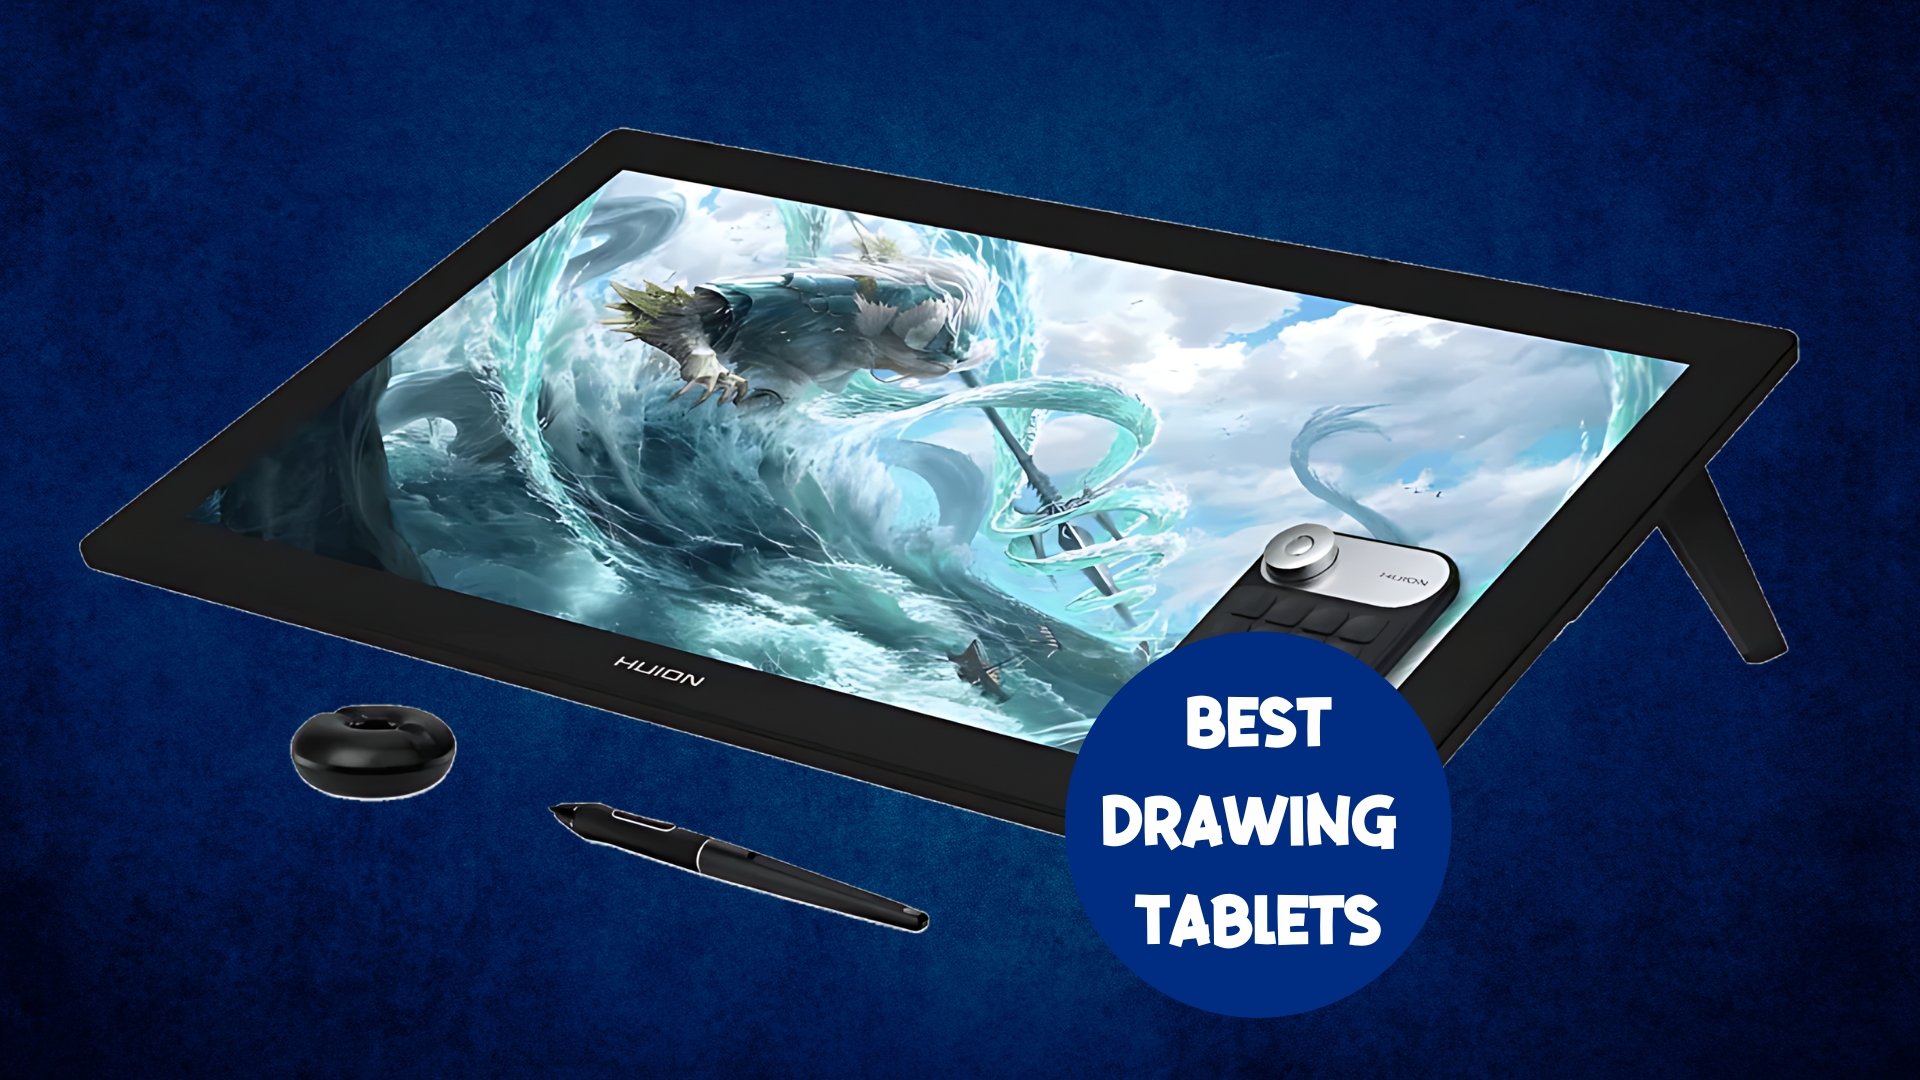 The Best Drawing Tablets for Beginners and Professional Artists